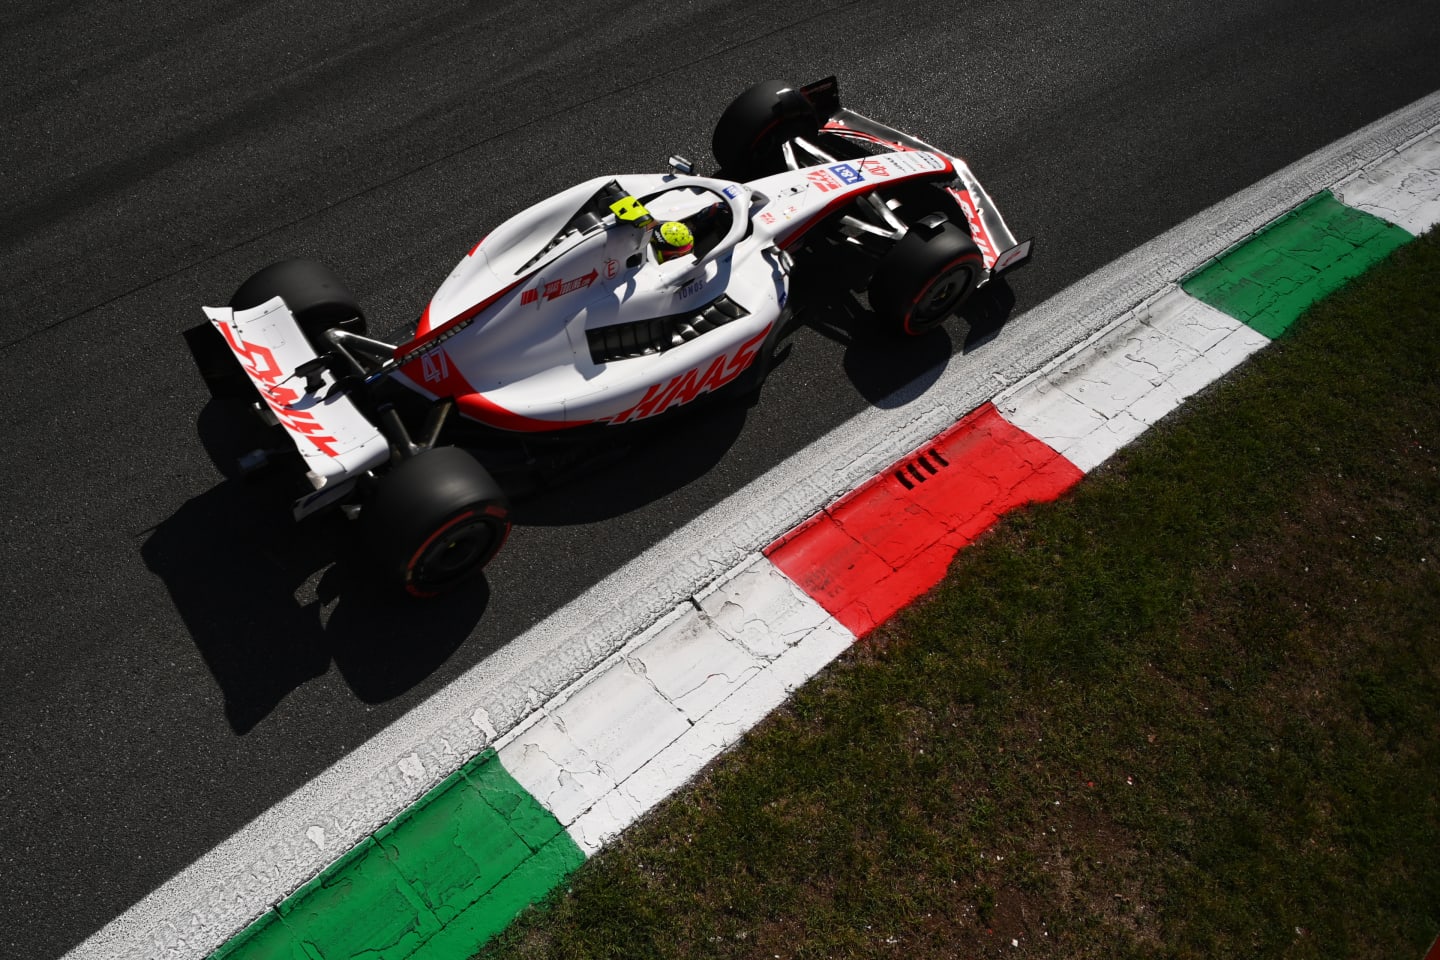 MONZA, ITALY - SEPTEMBER 10: Mick Schumacher of Germany driving the (47) Haas F1 VF-22 Ferrari on track during final practice ahead of the F1 Grand Prix of Italy at Autodromo Nazionale Monza on September 10, 2022 in Monza, Italy. (Photo by Dan Mullan/Getty Images)